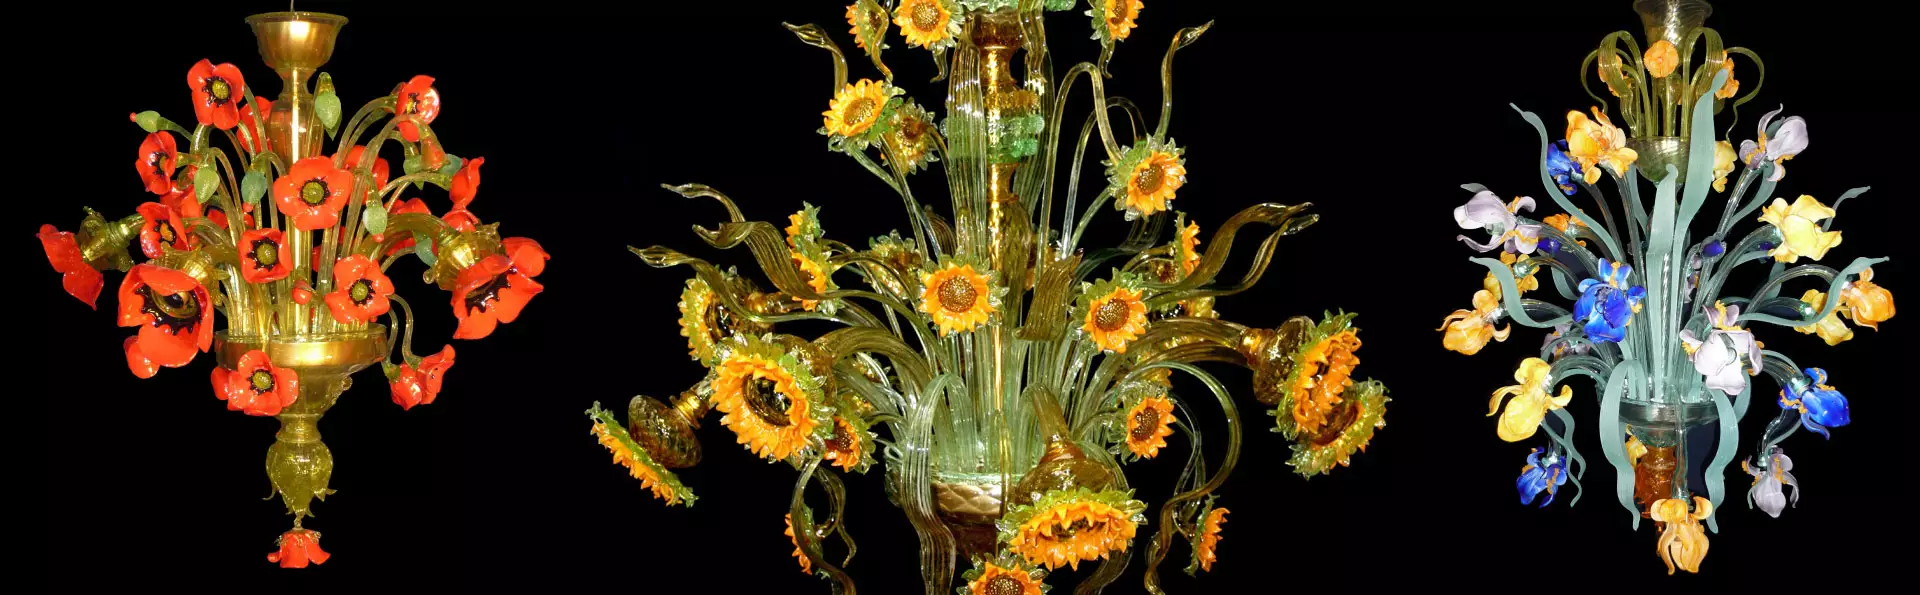 Floral glass chandeliers